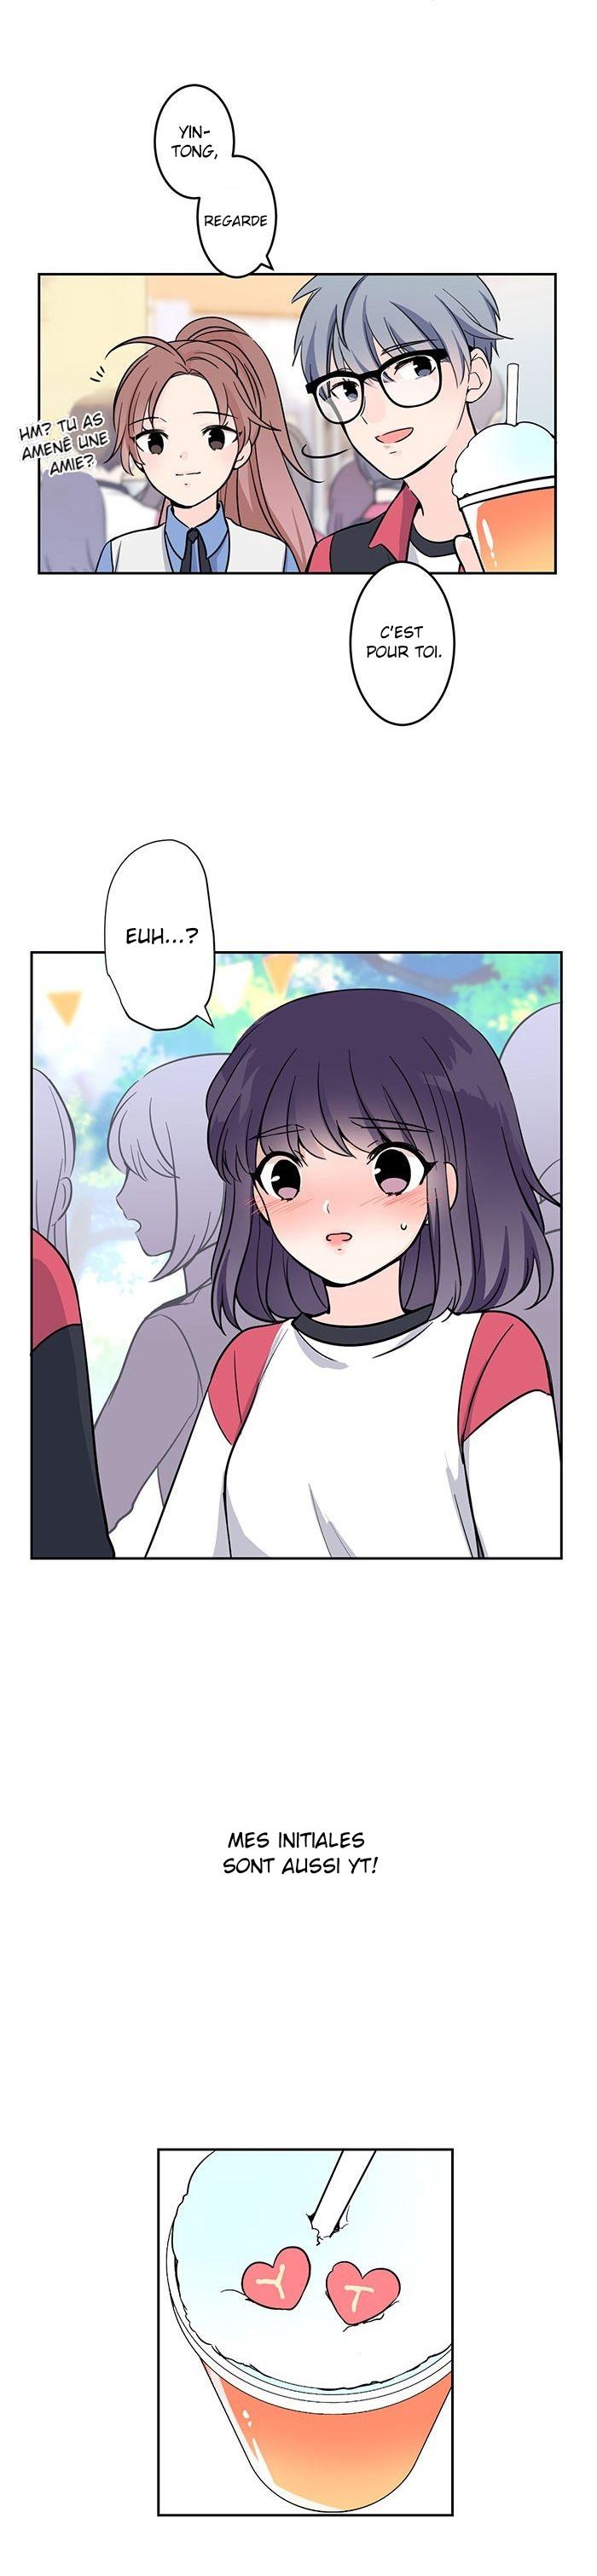 Reversed Love Route: Chapter 7 - Page 1